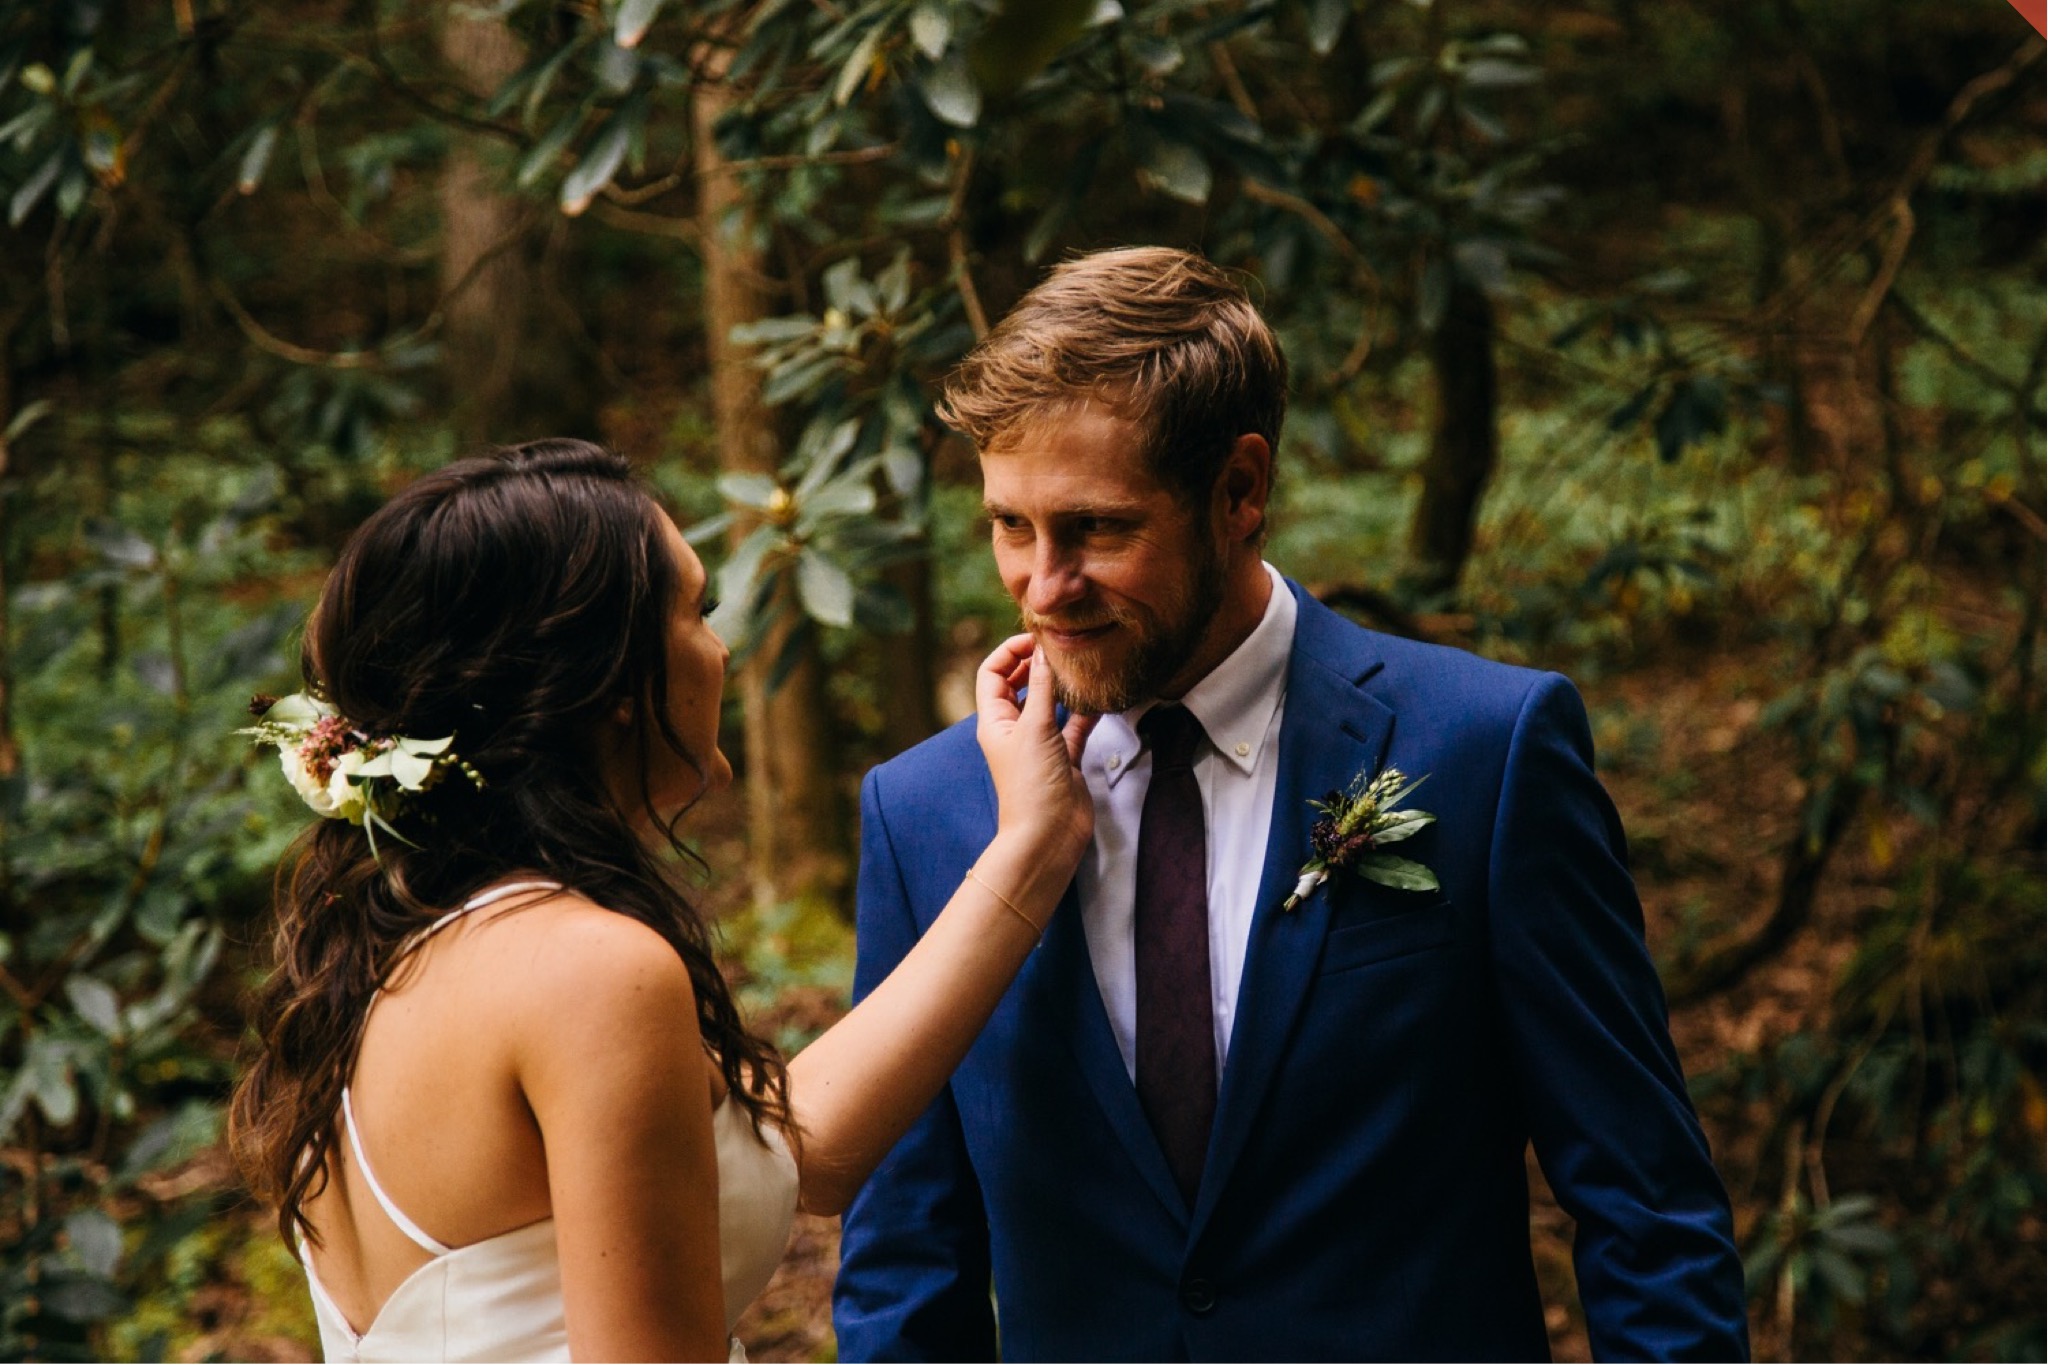 The bride strokes the groom's beard during their first look in the woods.